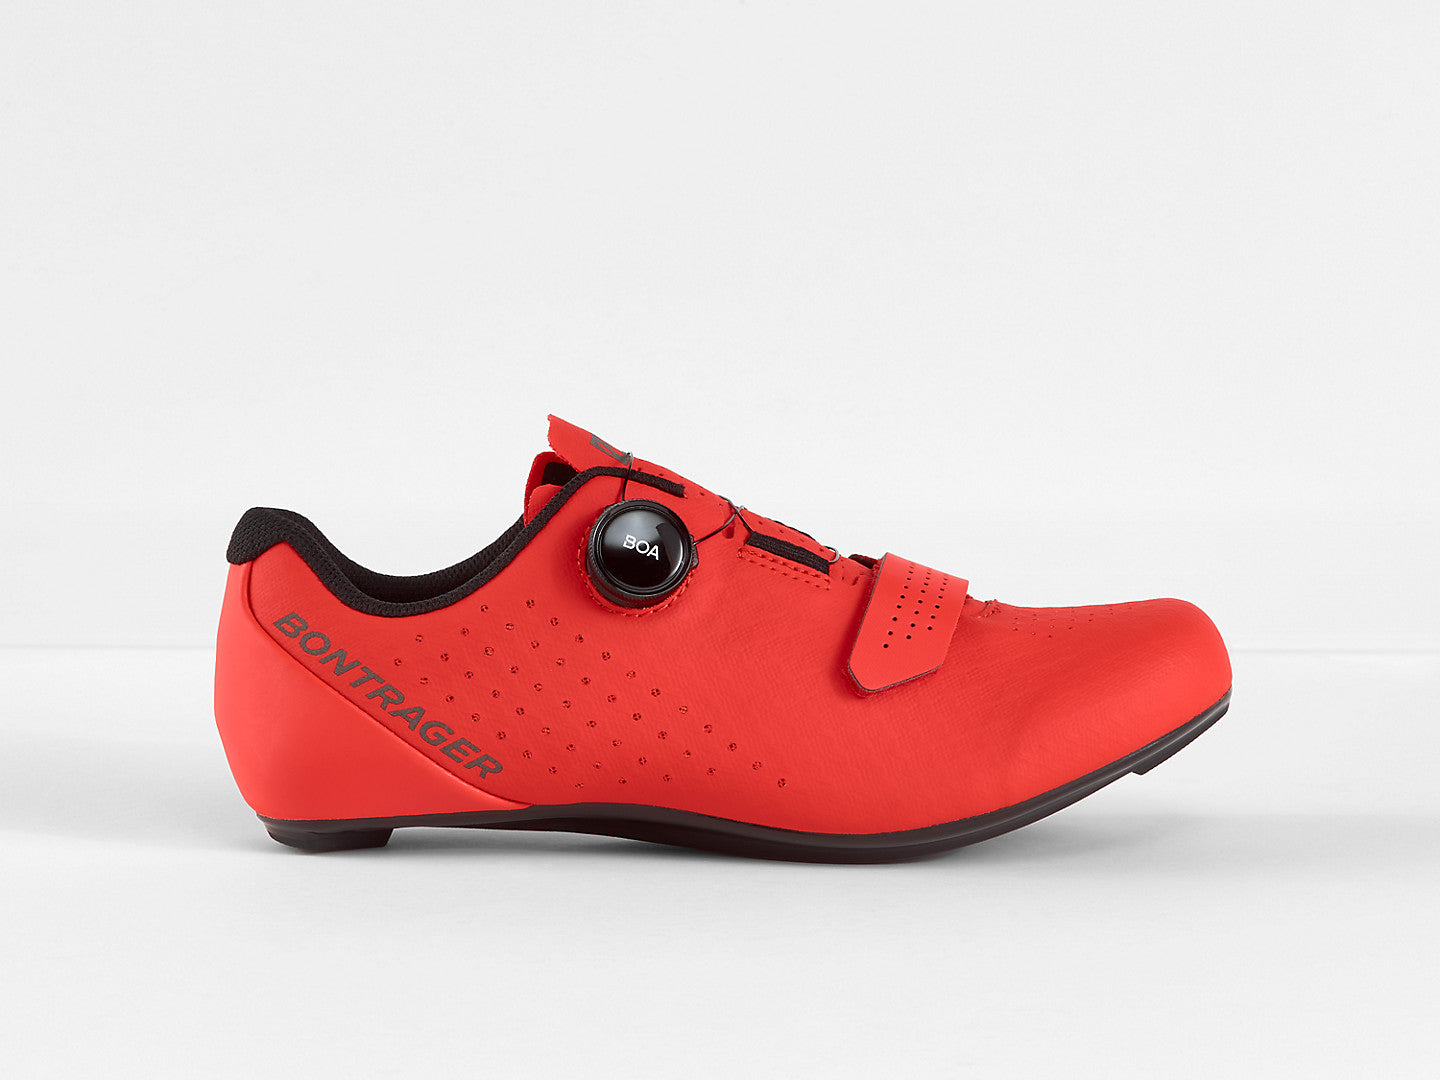 BONTRAGER - CIRCUIT ROAD CYCLING SHOE (SAVE 50% NOW! ENTER CODE BONTRAGER50 AT CHECK OUT)